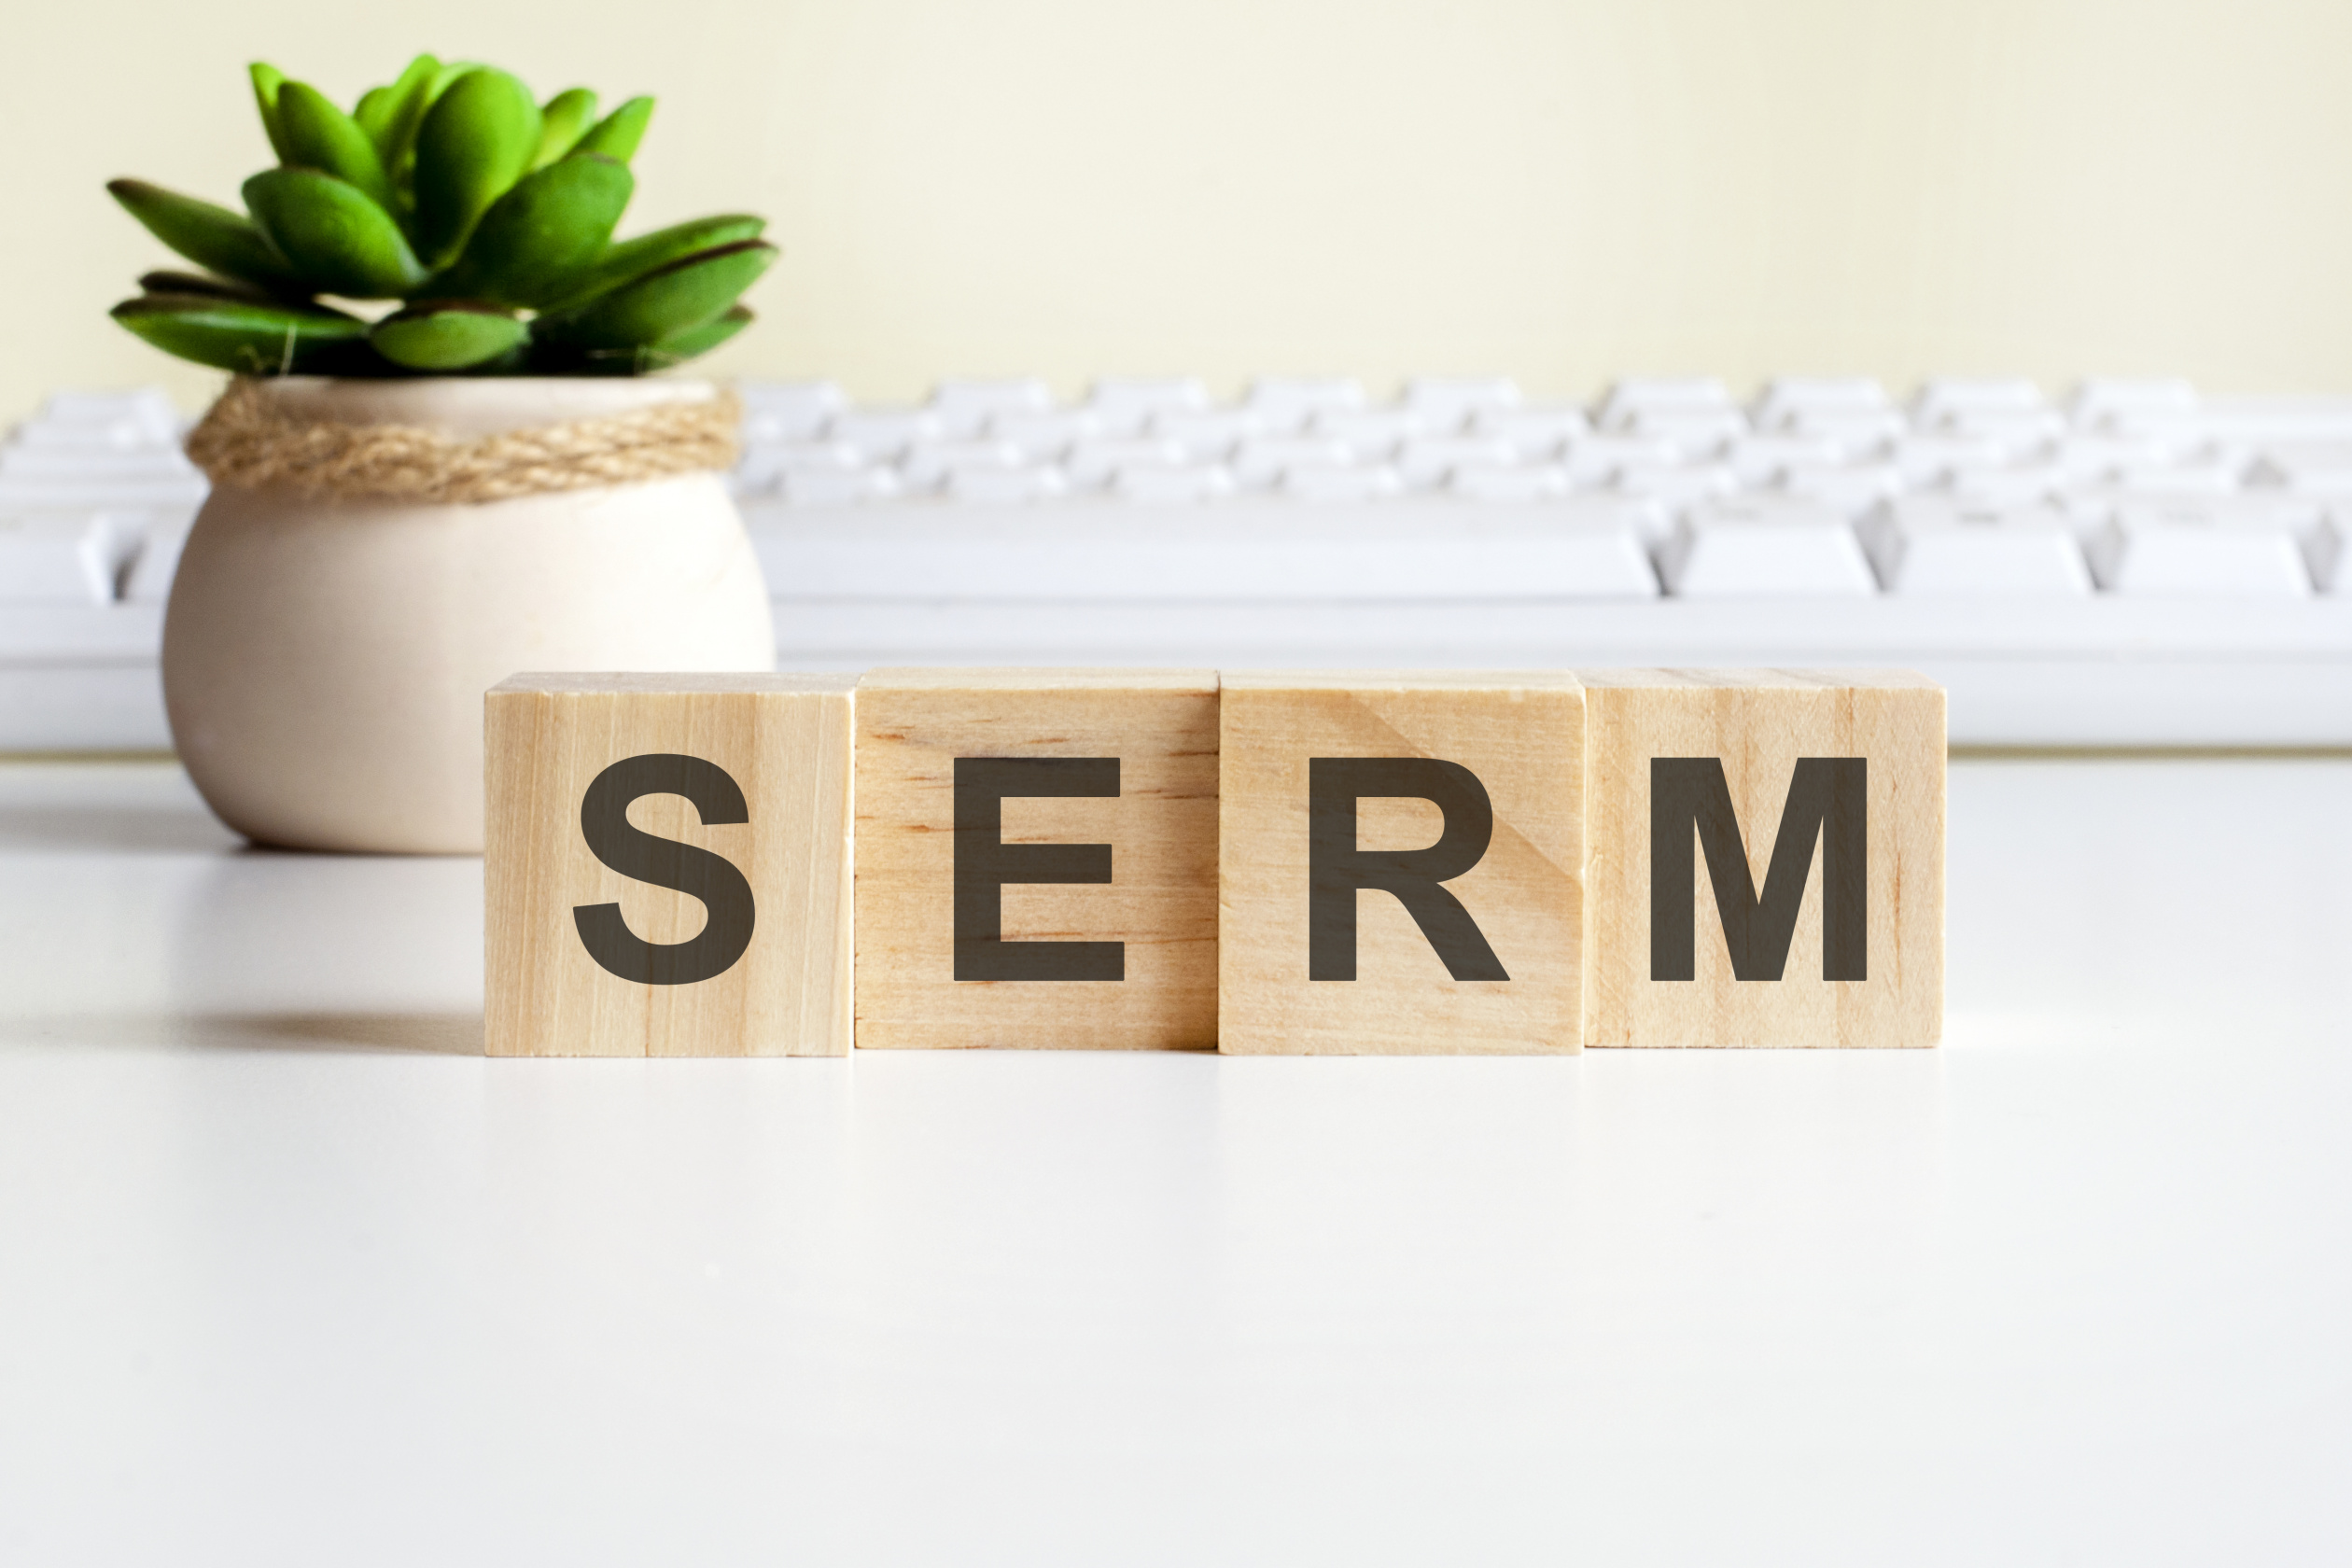 serm-word-made-with-wooden-blocks-front-view-concepts-green-plant-flower-vase-white-keyboard-background.jpg